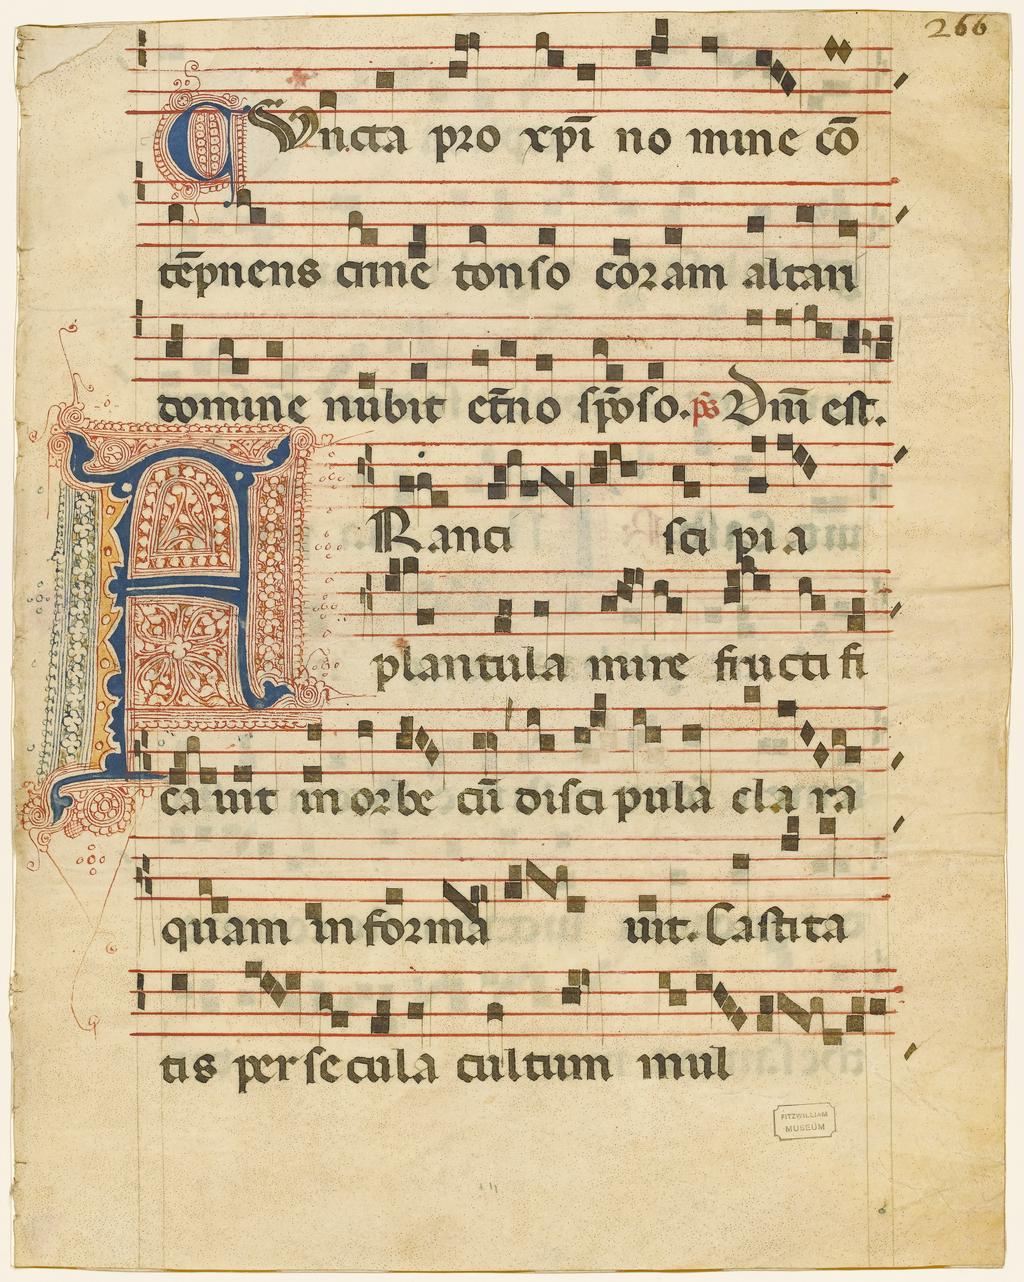 An image of Illuminated manuscript. Cutting. Fragment from an Antiphoner. Production Place: Italy. Parchment, gold, 437 x 343 mm, eight four-line musical staves ruled in red ink, eight lines of text ruled in plummet, circa 1350.CONTENTS: Third antiphon of the first nocturn in Matins for the feast of St Clare, Cuncta pro Christi nomine contemnens crine tonso coram altari Domine nubit eterno sponso, followed by the responsory for the first lesson in Matins, Francisci pia plantula mire fructificavit in orbe cum discipula Clara quam informavit. Castitatis per secula cultum… mul- (continuing on verso) -tiplicavit, versicle Virgo sub sacra regula multarum iam preambula se deo consecravit, and responsory In via penitentie glebas…thesaurus meritorum; the initial F would have introduced the responsory for the first lesson in Matins for the feast of St Clare (12 August) in a Franciscan Antiphoner for the Sanctoral. ORNAMENTATION: Blue and red parted initial [F, height of three staves] with voided ornament, yellow wash and red and blue pen-flourished infill and extensions; alternate blue and red one-line penwork initials with red or blue pen flourishing.